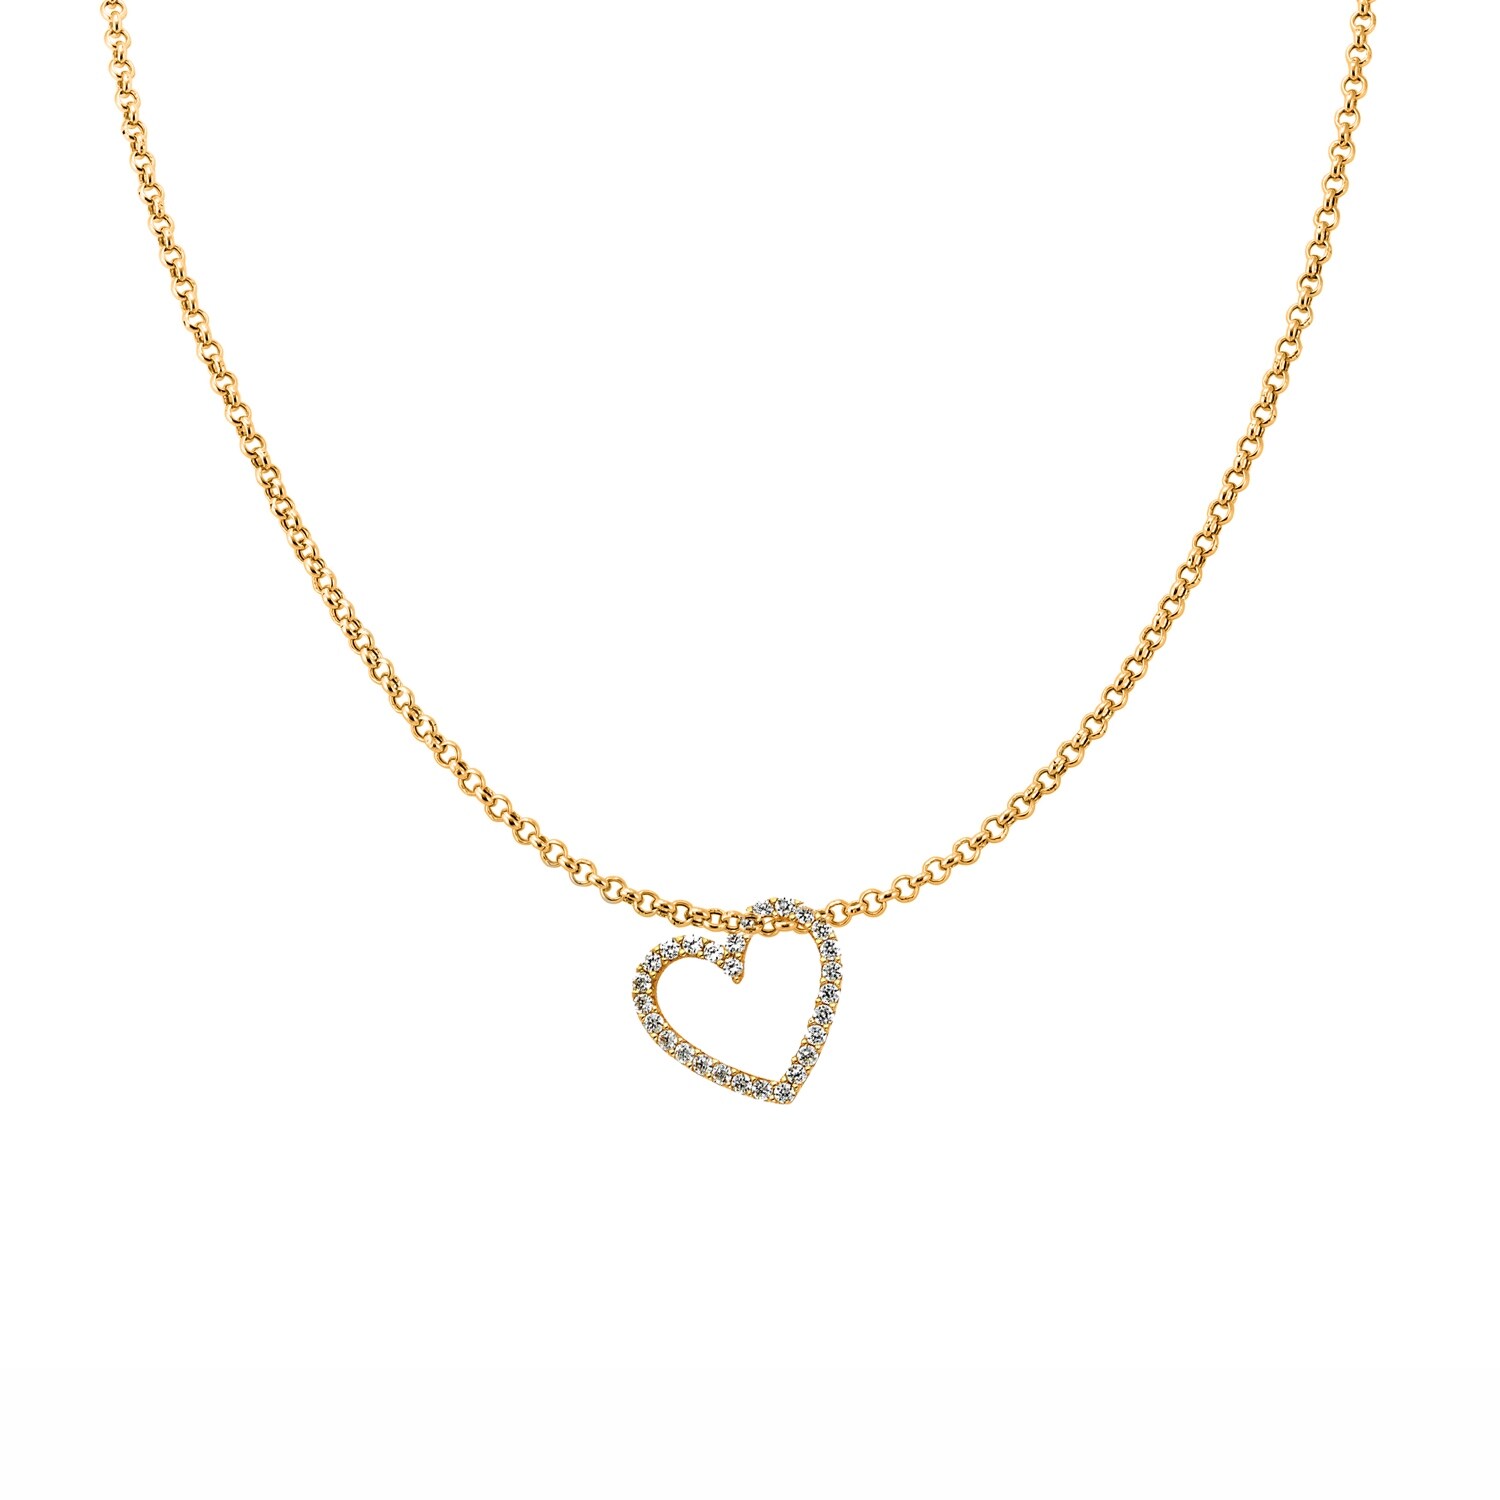 14k Yellow Gold Open Heart CZ Pendant with 1.2mm Cable Chain Necklace 